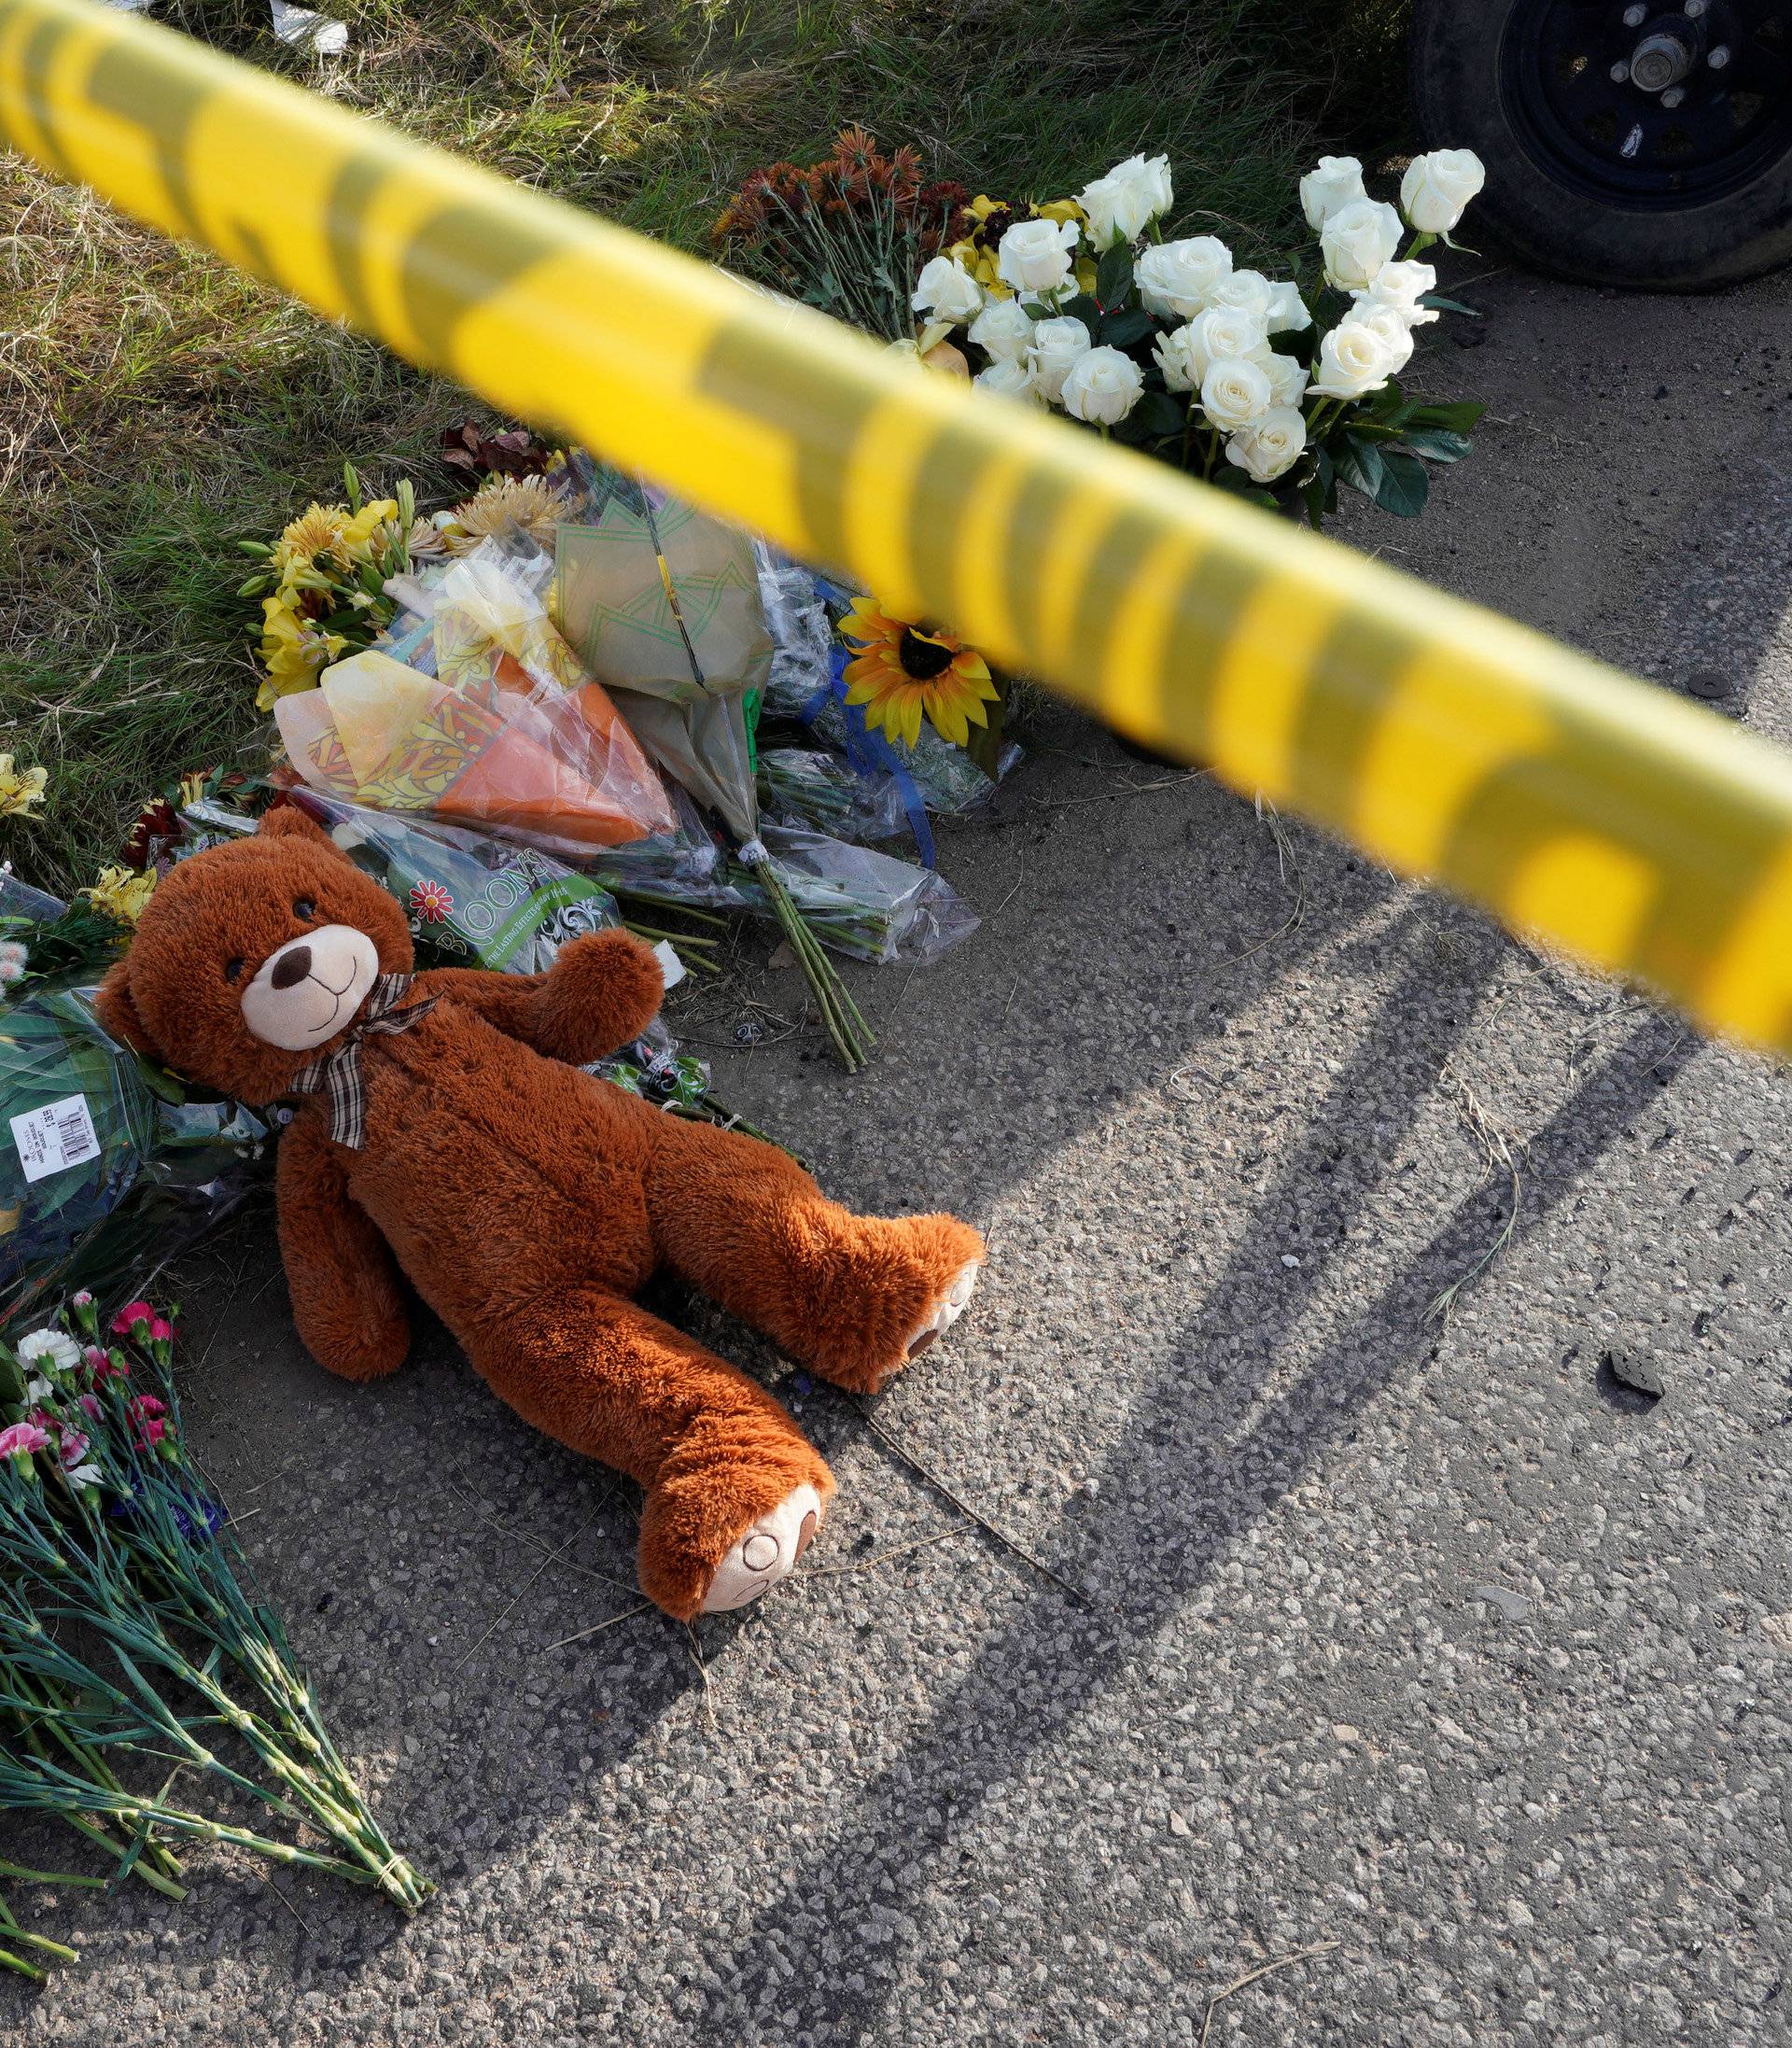 A Teddy bear lies under police tape at a makeshift memorial for those killed in the shooting at the First Baptist Church of Sutherland